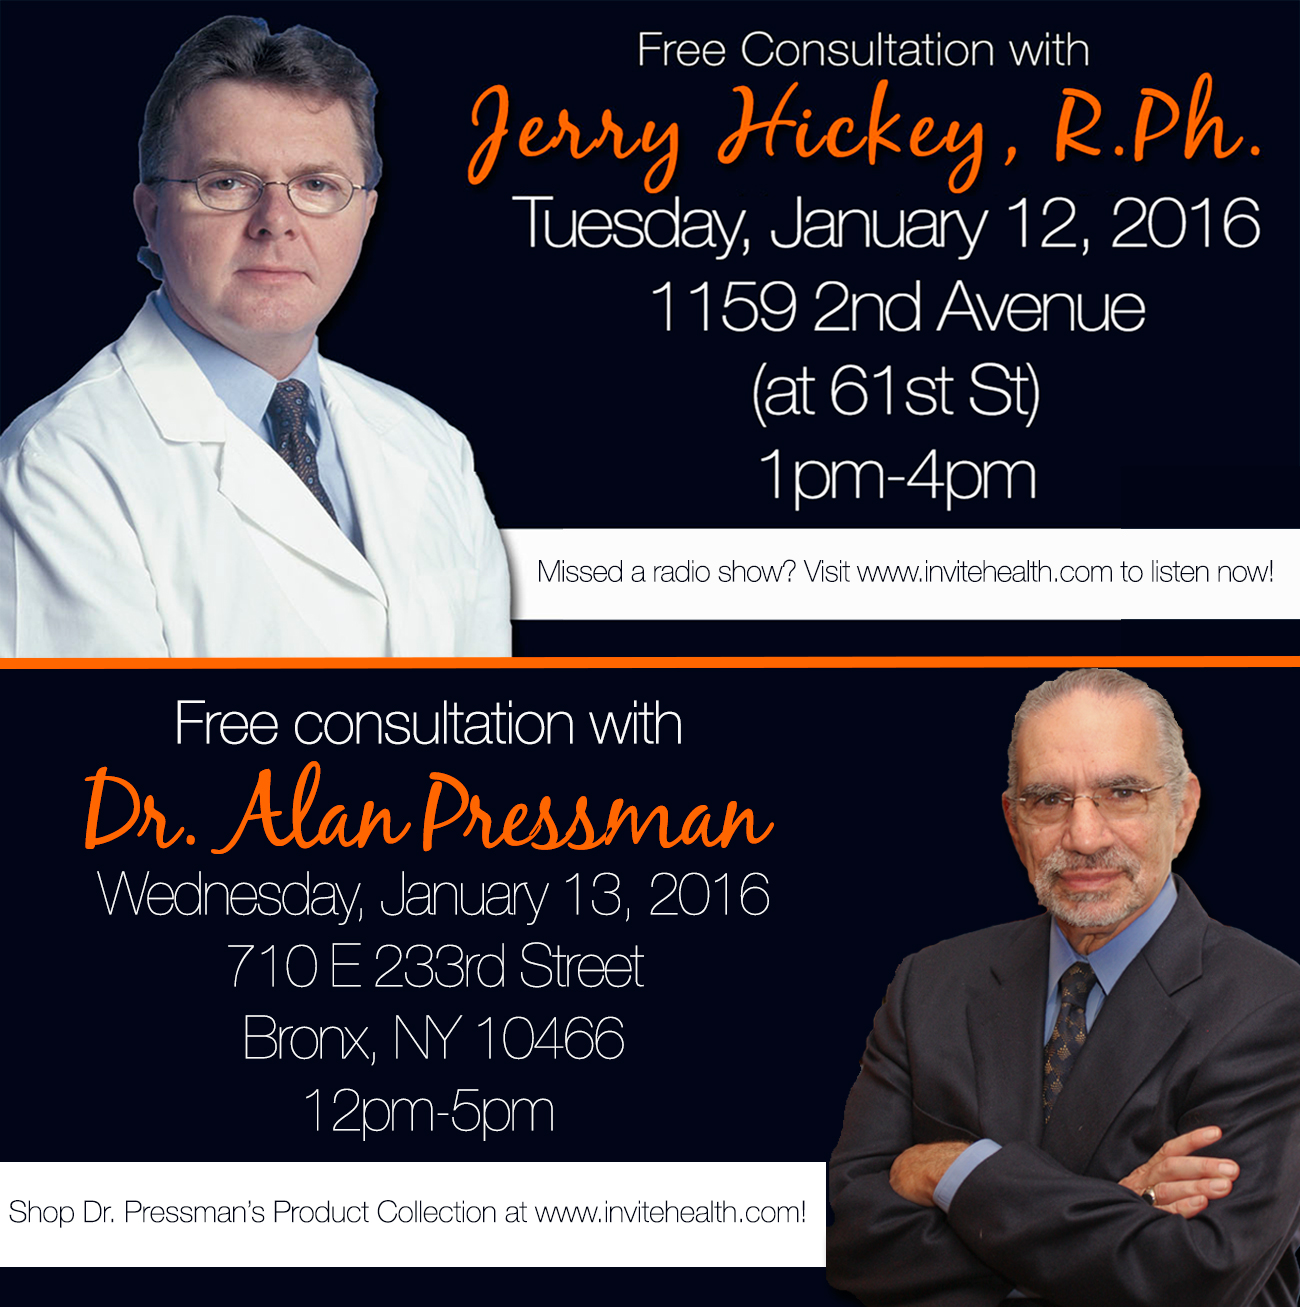 Meet Jerry Hickey, R.Ph & Dr. Alan Pressman for Free Consultations!